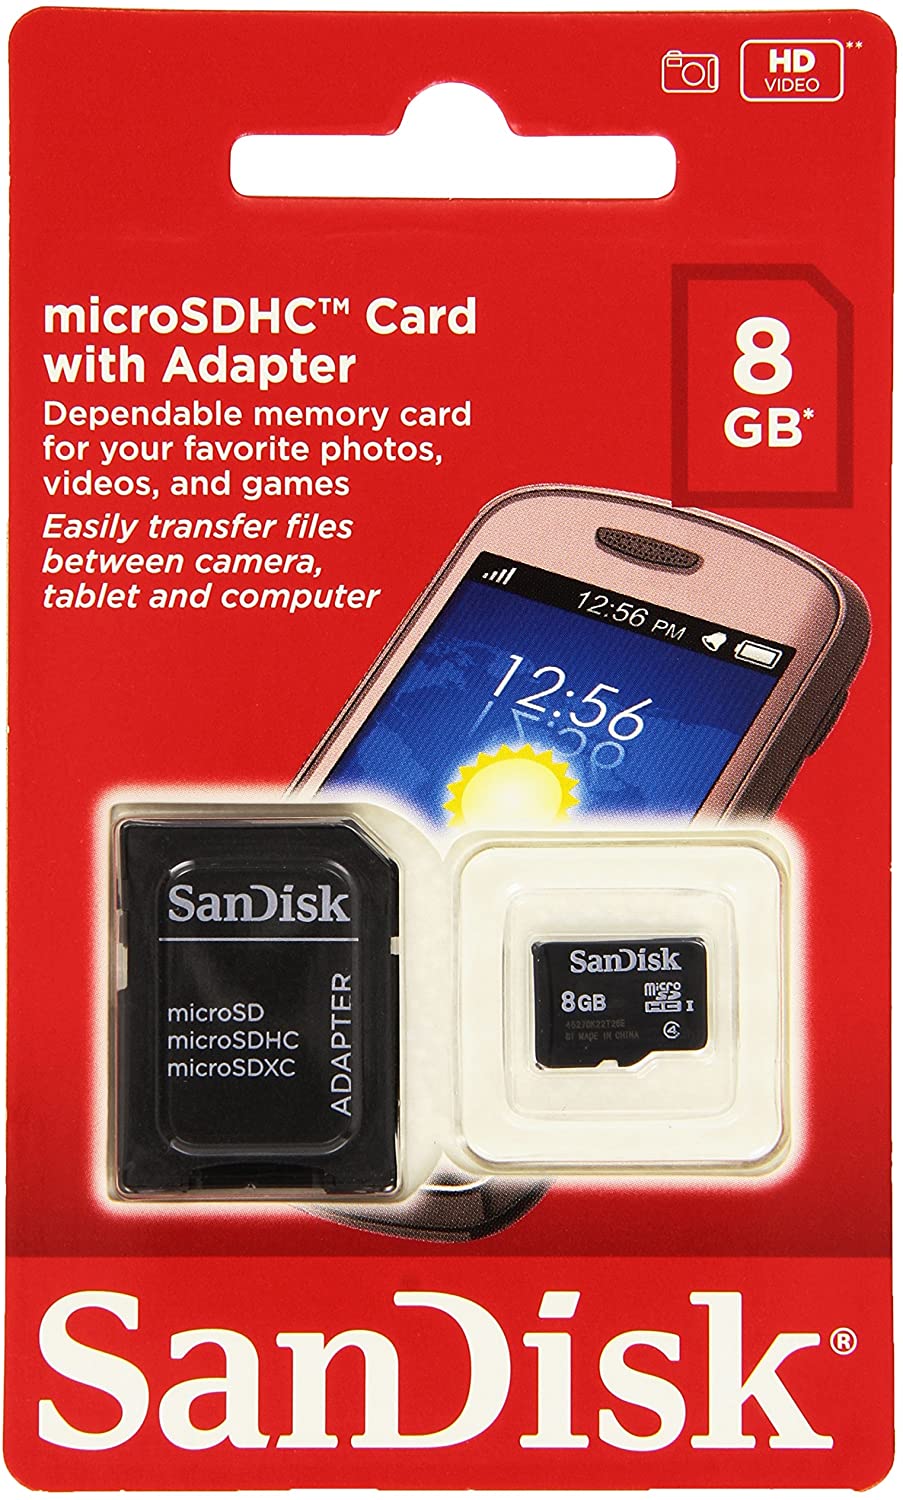 SANDISK MICROSD 8GB CLASS 4 WITH SD ADAPTER SDHC CARD